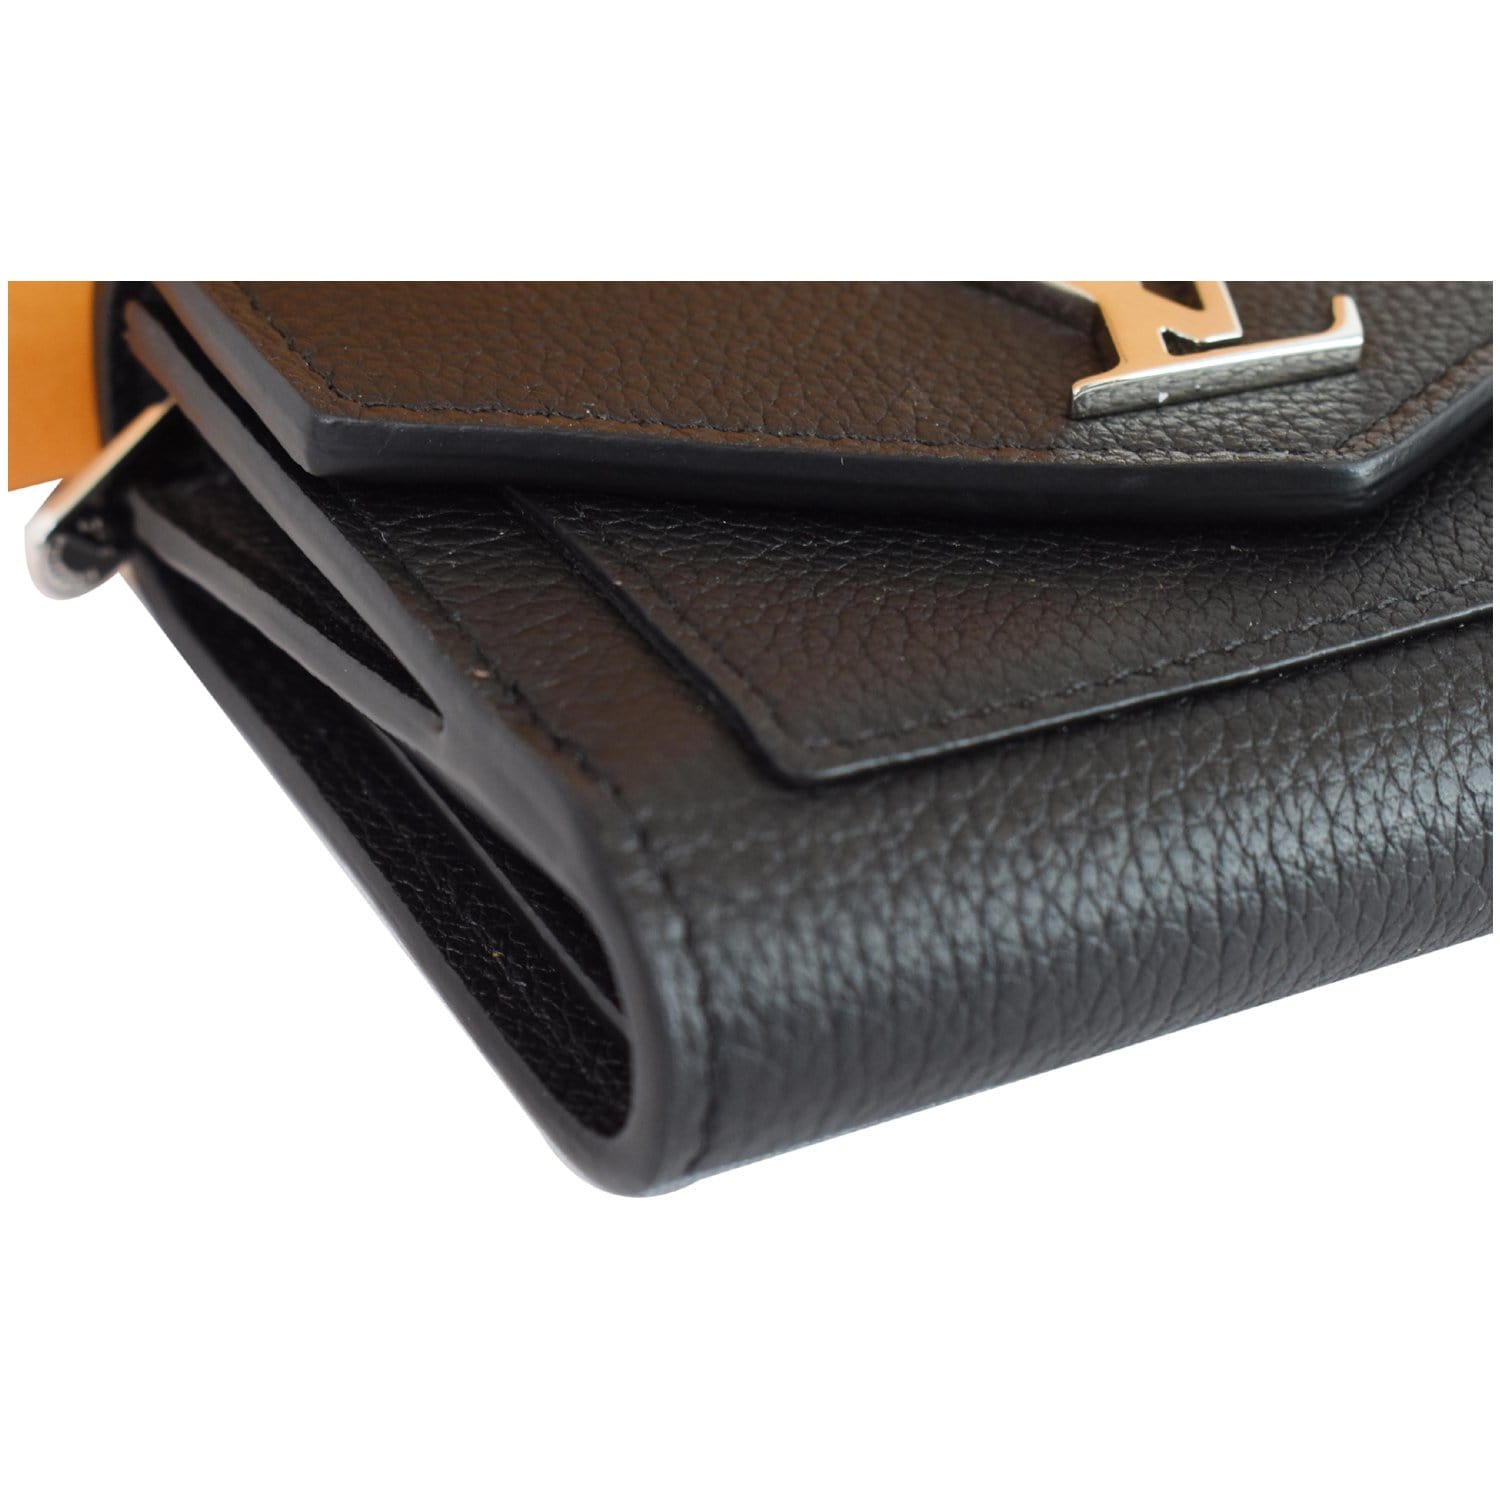 MyLockMe Compact Wallet Lockme Leather - Wallets and Small Leather